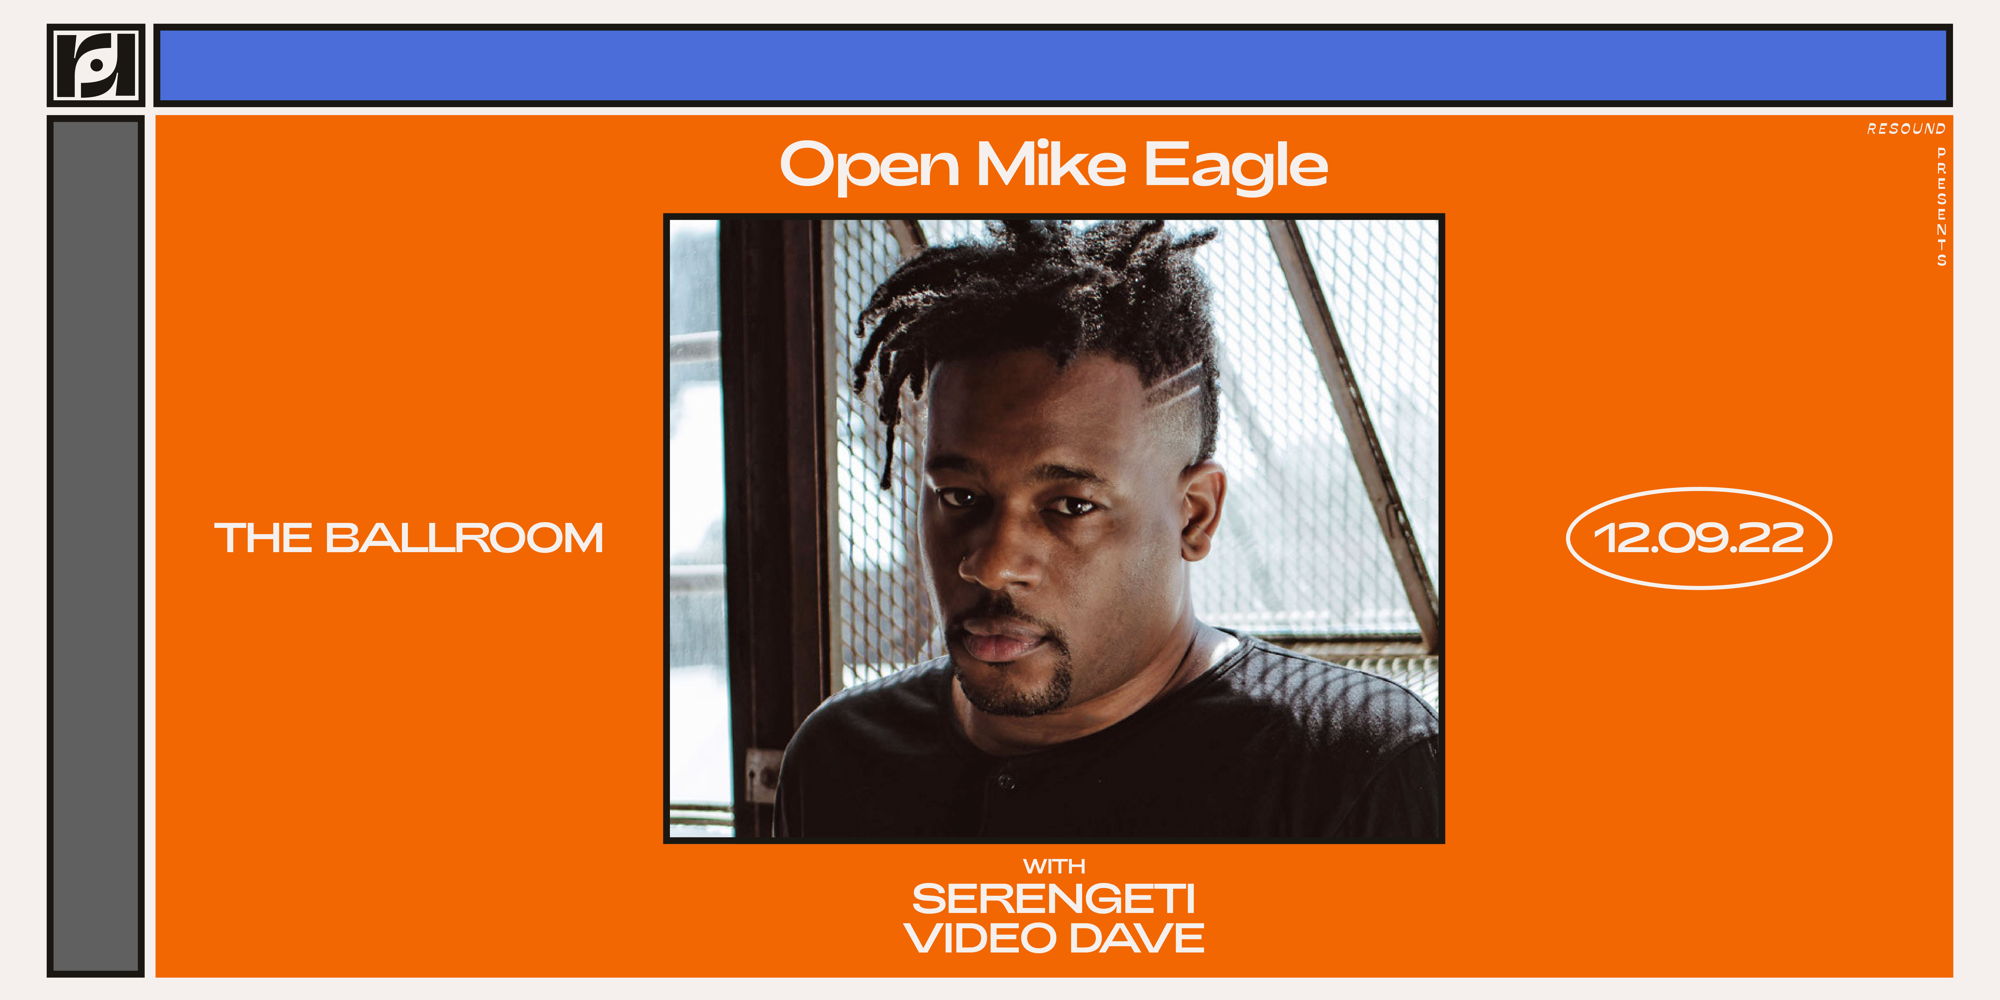 Resound Presents: Open Mike Eagle w/ Serengeti and Video Dave at The Ballroom on 12/9 promotional image